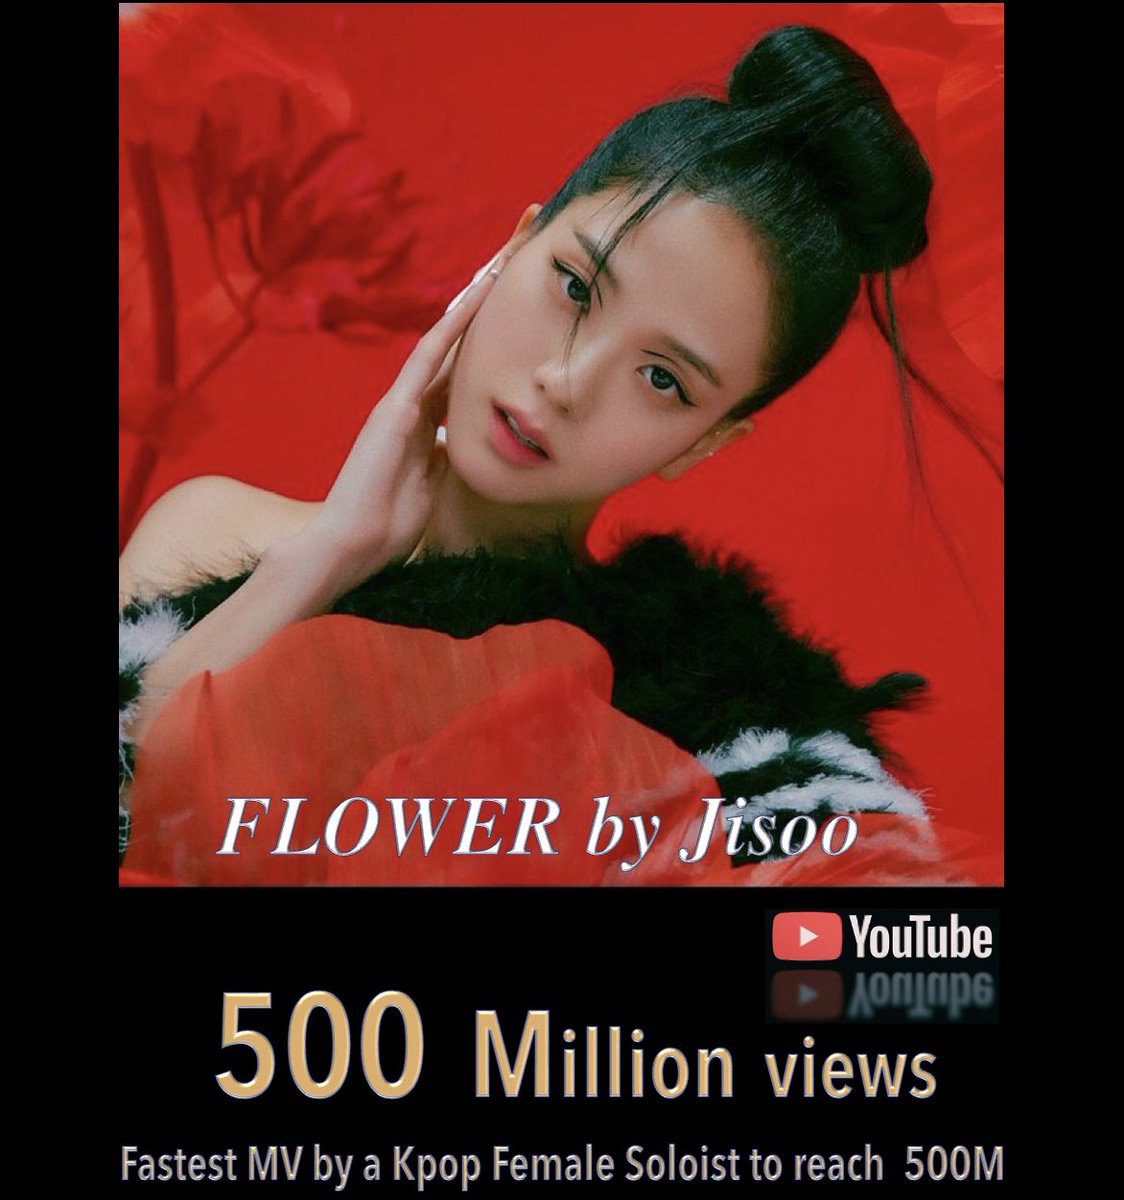 'FLOWER' by #JISOO has surpassed 500 Million views on YouTube! It's the FASTEST Music Video by a Korean female soloist to reach this milestone! 💪🌹💨🇰🇷👩‍🎤📽️5⃣0⃣0⃣Ⓜ️👑❤️‍🔥 FLOWER 500M VIEWS #FLOWERbyJISOO500M #FLOWER #BLACKPINK @BLACKPINK @officialBLISSOO